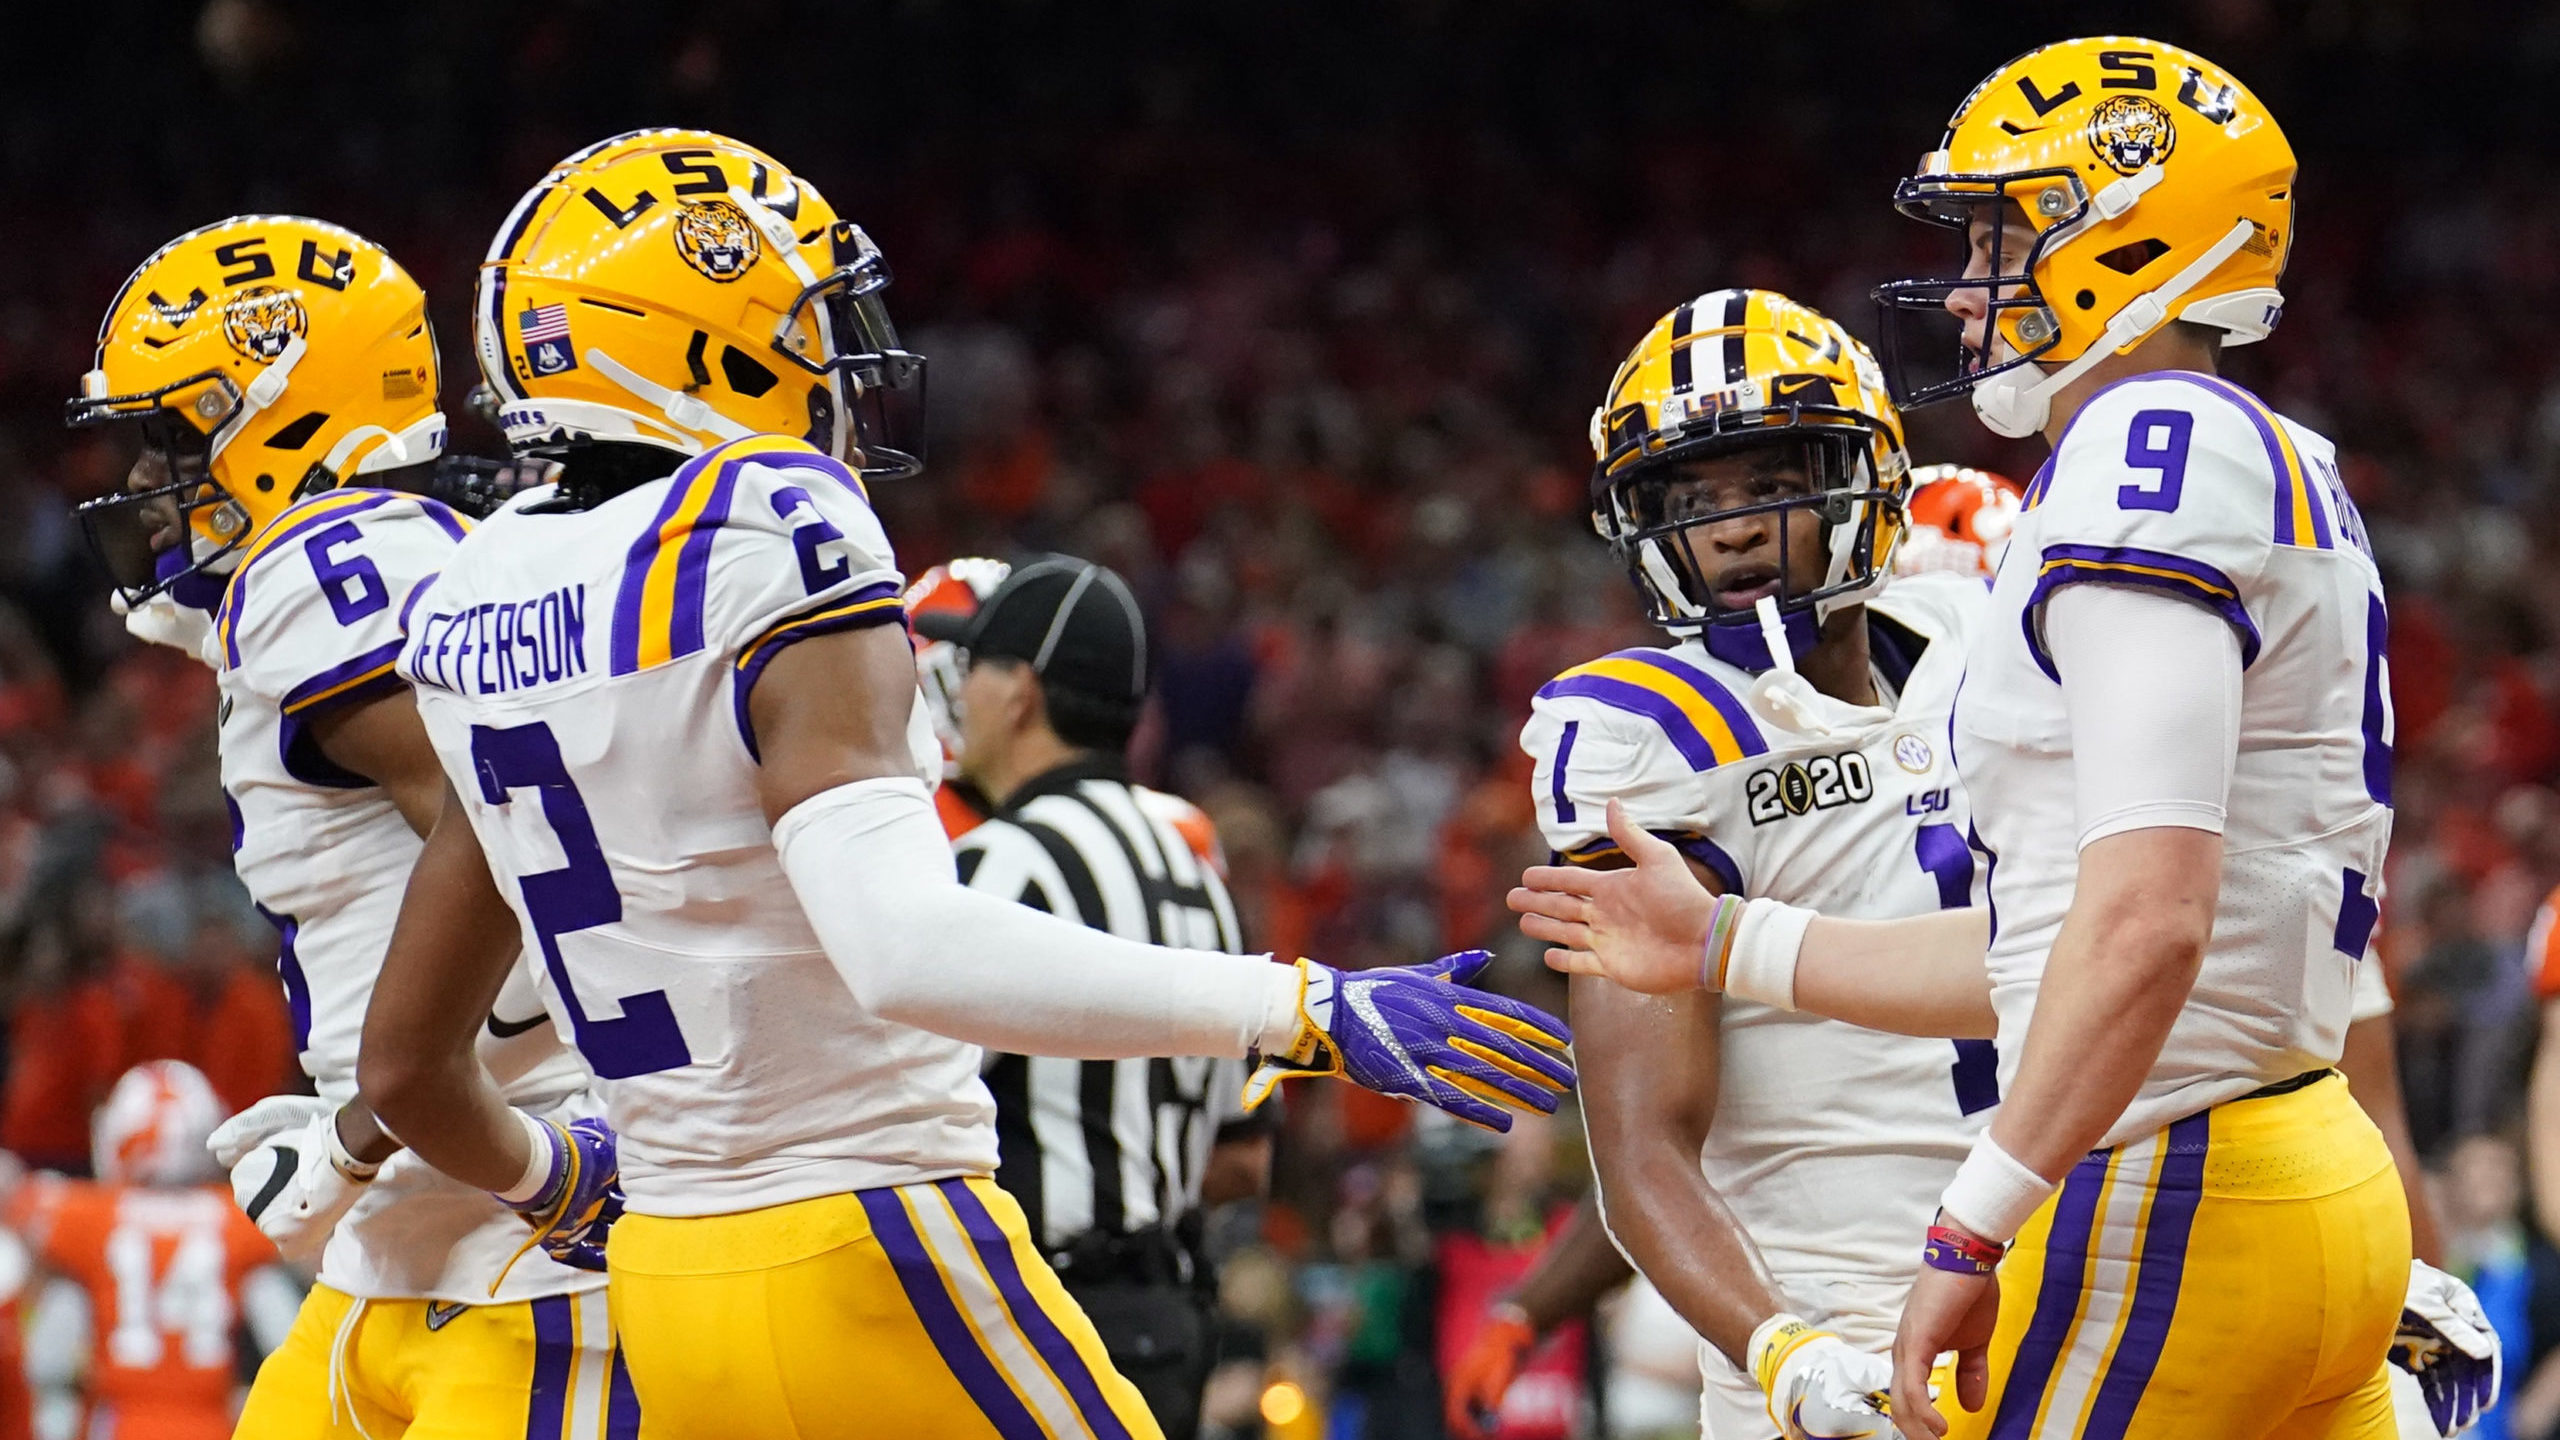 Jan 13, 2020; New Orleans, Louisiana, USA; LSU Tigers quarterback Joe Burrow (9) celebrates with wide receiver Justin Jefferson (2) after scoring a touchdown against the Clemson Tigers second quarter in the College Football Playoff national championship game at Mercedes-Benz Superdome. Mandatory Credit: Kirby Lee-USA TODAY Sports